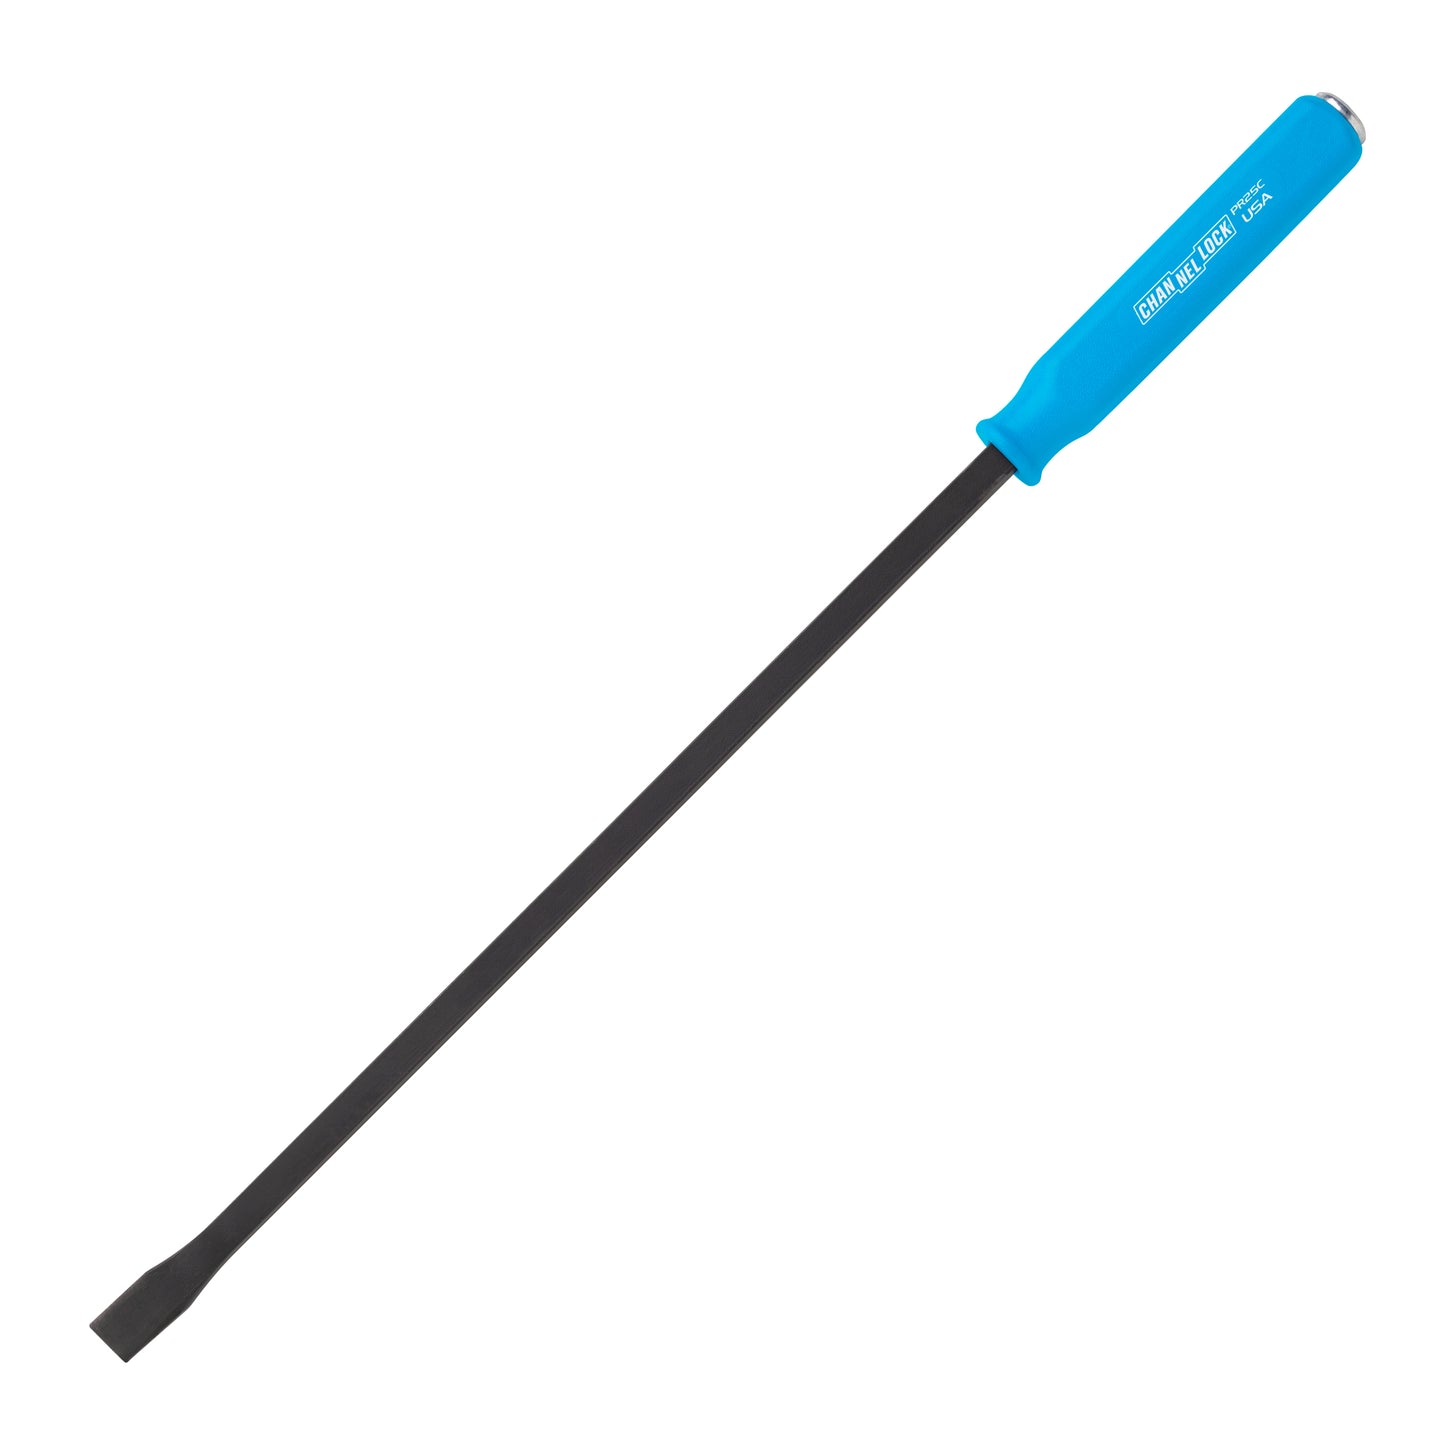 PR25C 1/2 x 18-inch Professional Pry Bar, 25-inch Overall Length